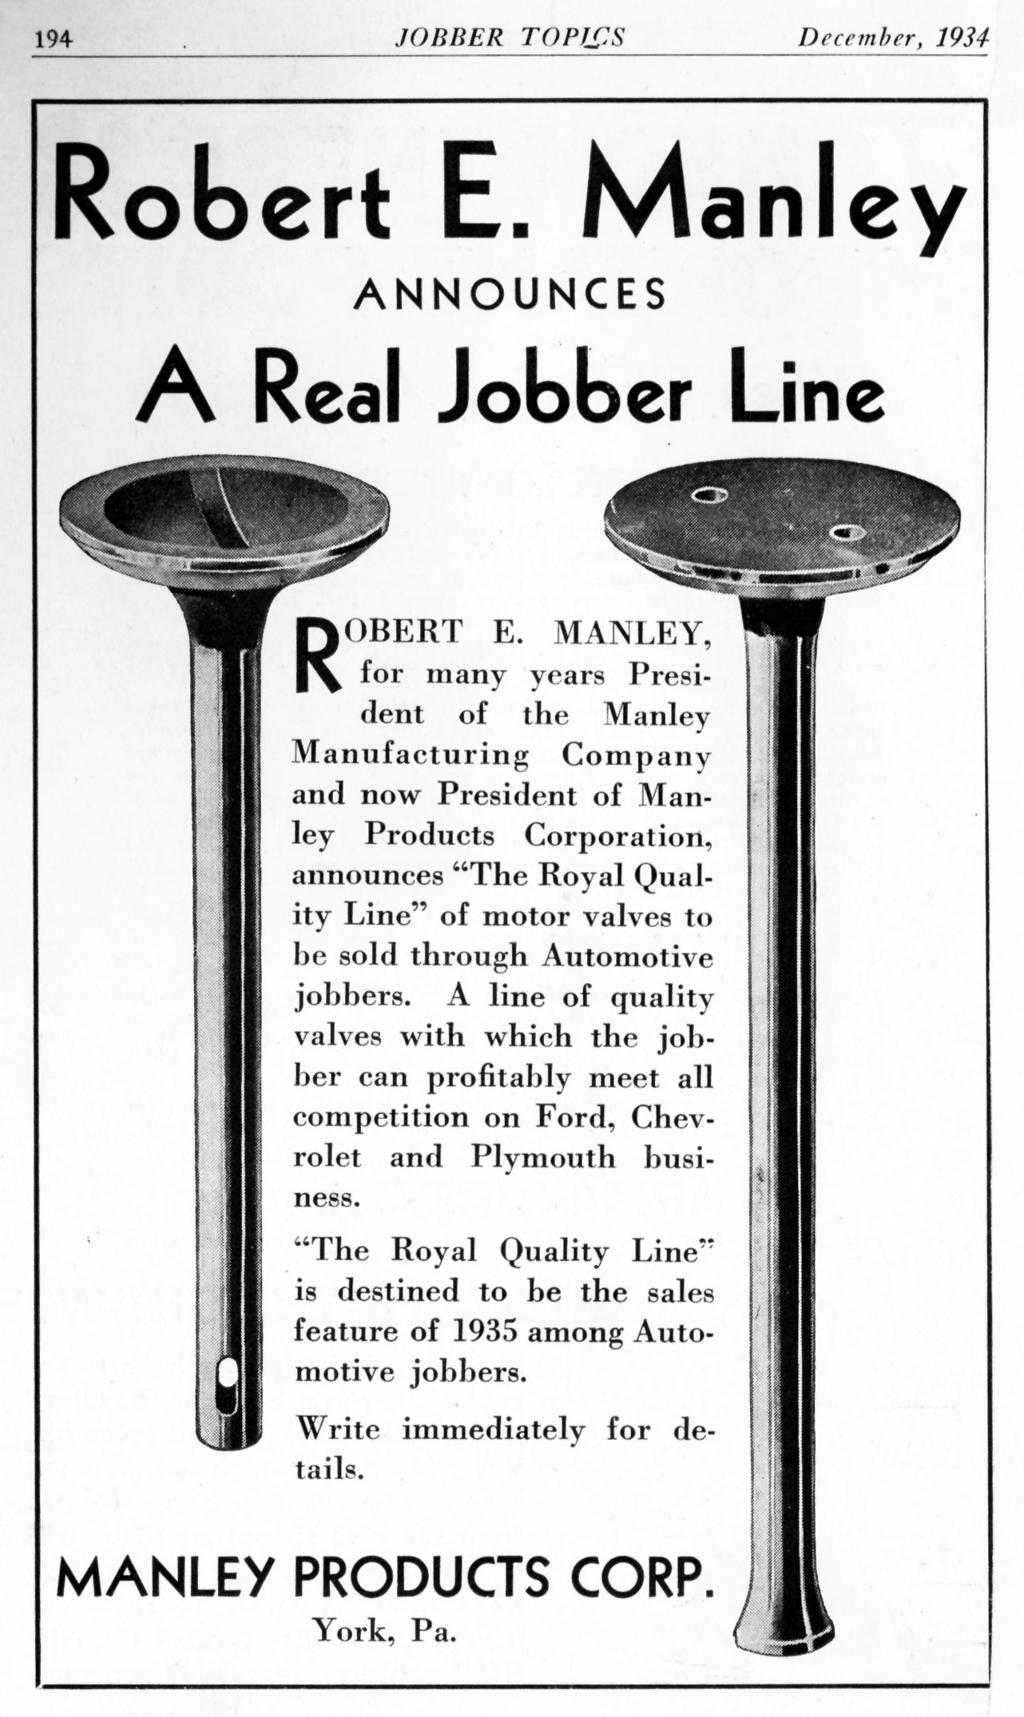 MANLEY HISTORY MANLEY HISTORY Did You Know in 2 you could purchase a Manley 2 ton hydraulic press for $.00 or a 2 /2 ton hydraulic jack for $48.00. Both products were invented by Robert E.